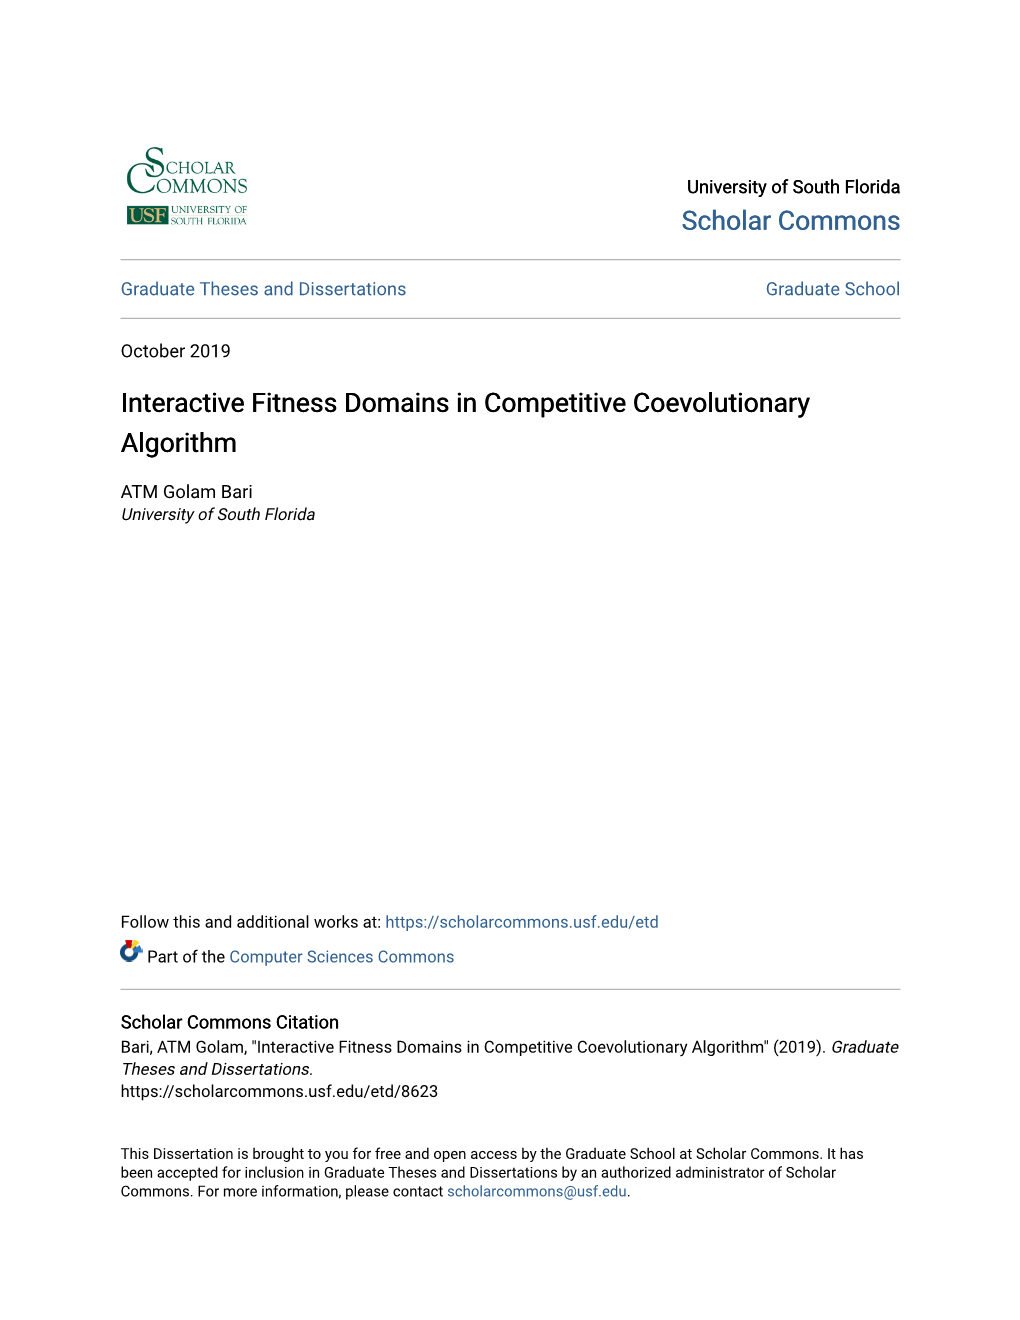 Interactive Fitness Domains in Competitive Coevolutionary Algorithm